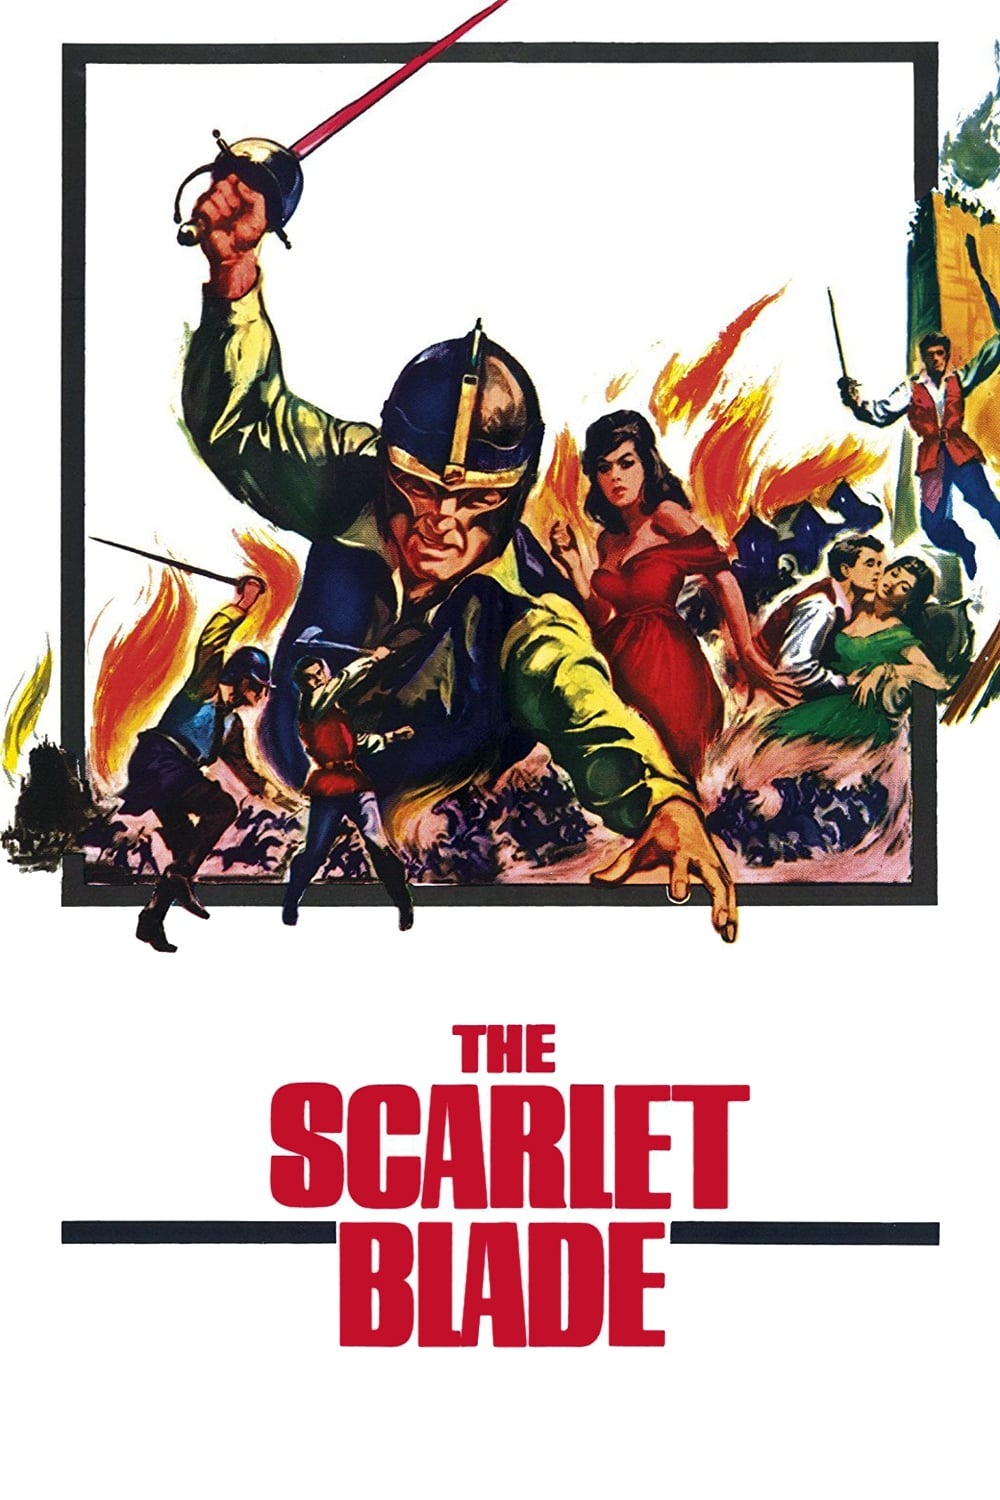 The Scarlet Blade (1963)